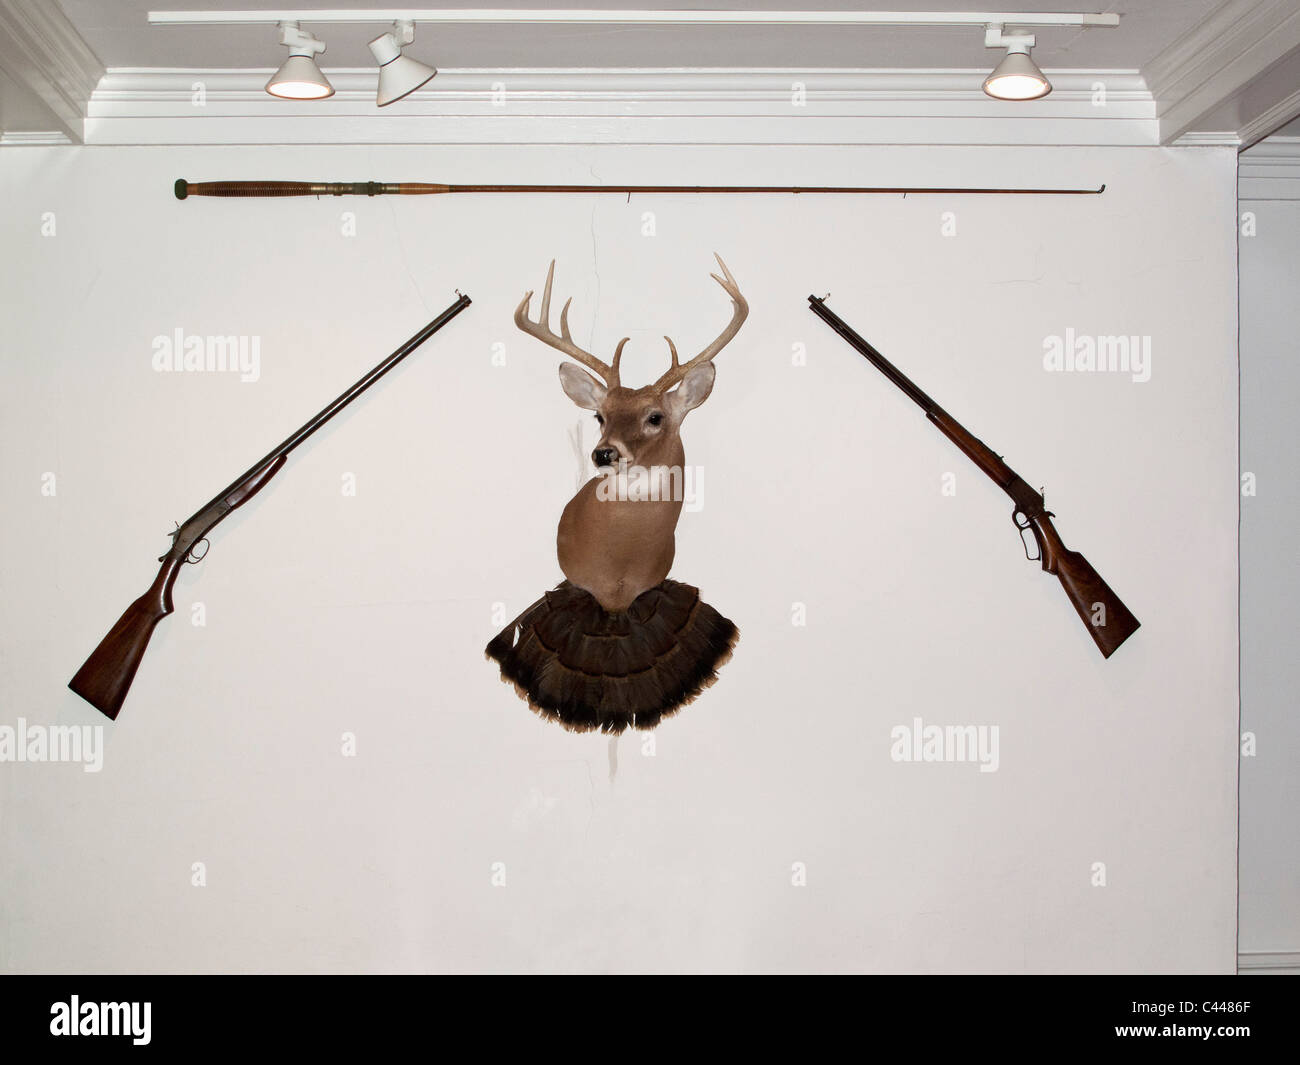 https://c8.alamy.com/comp/C4486F/a-hunting-trophy-in-the-middle-of-two-old-fashioned-rifles-and-a-fishing-C4486F.jpg